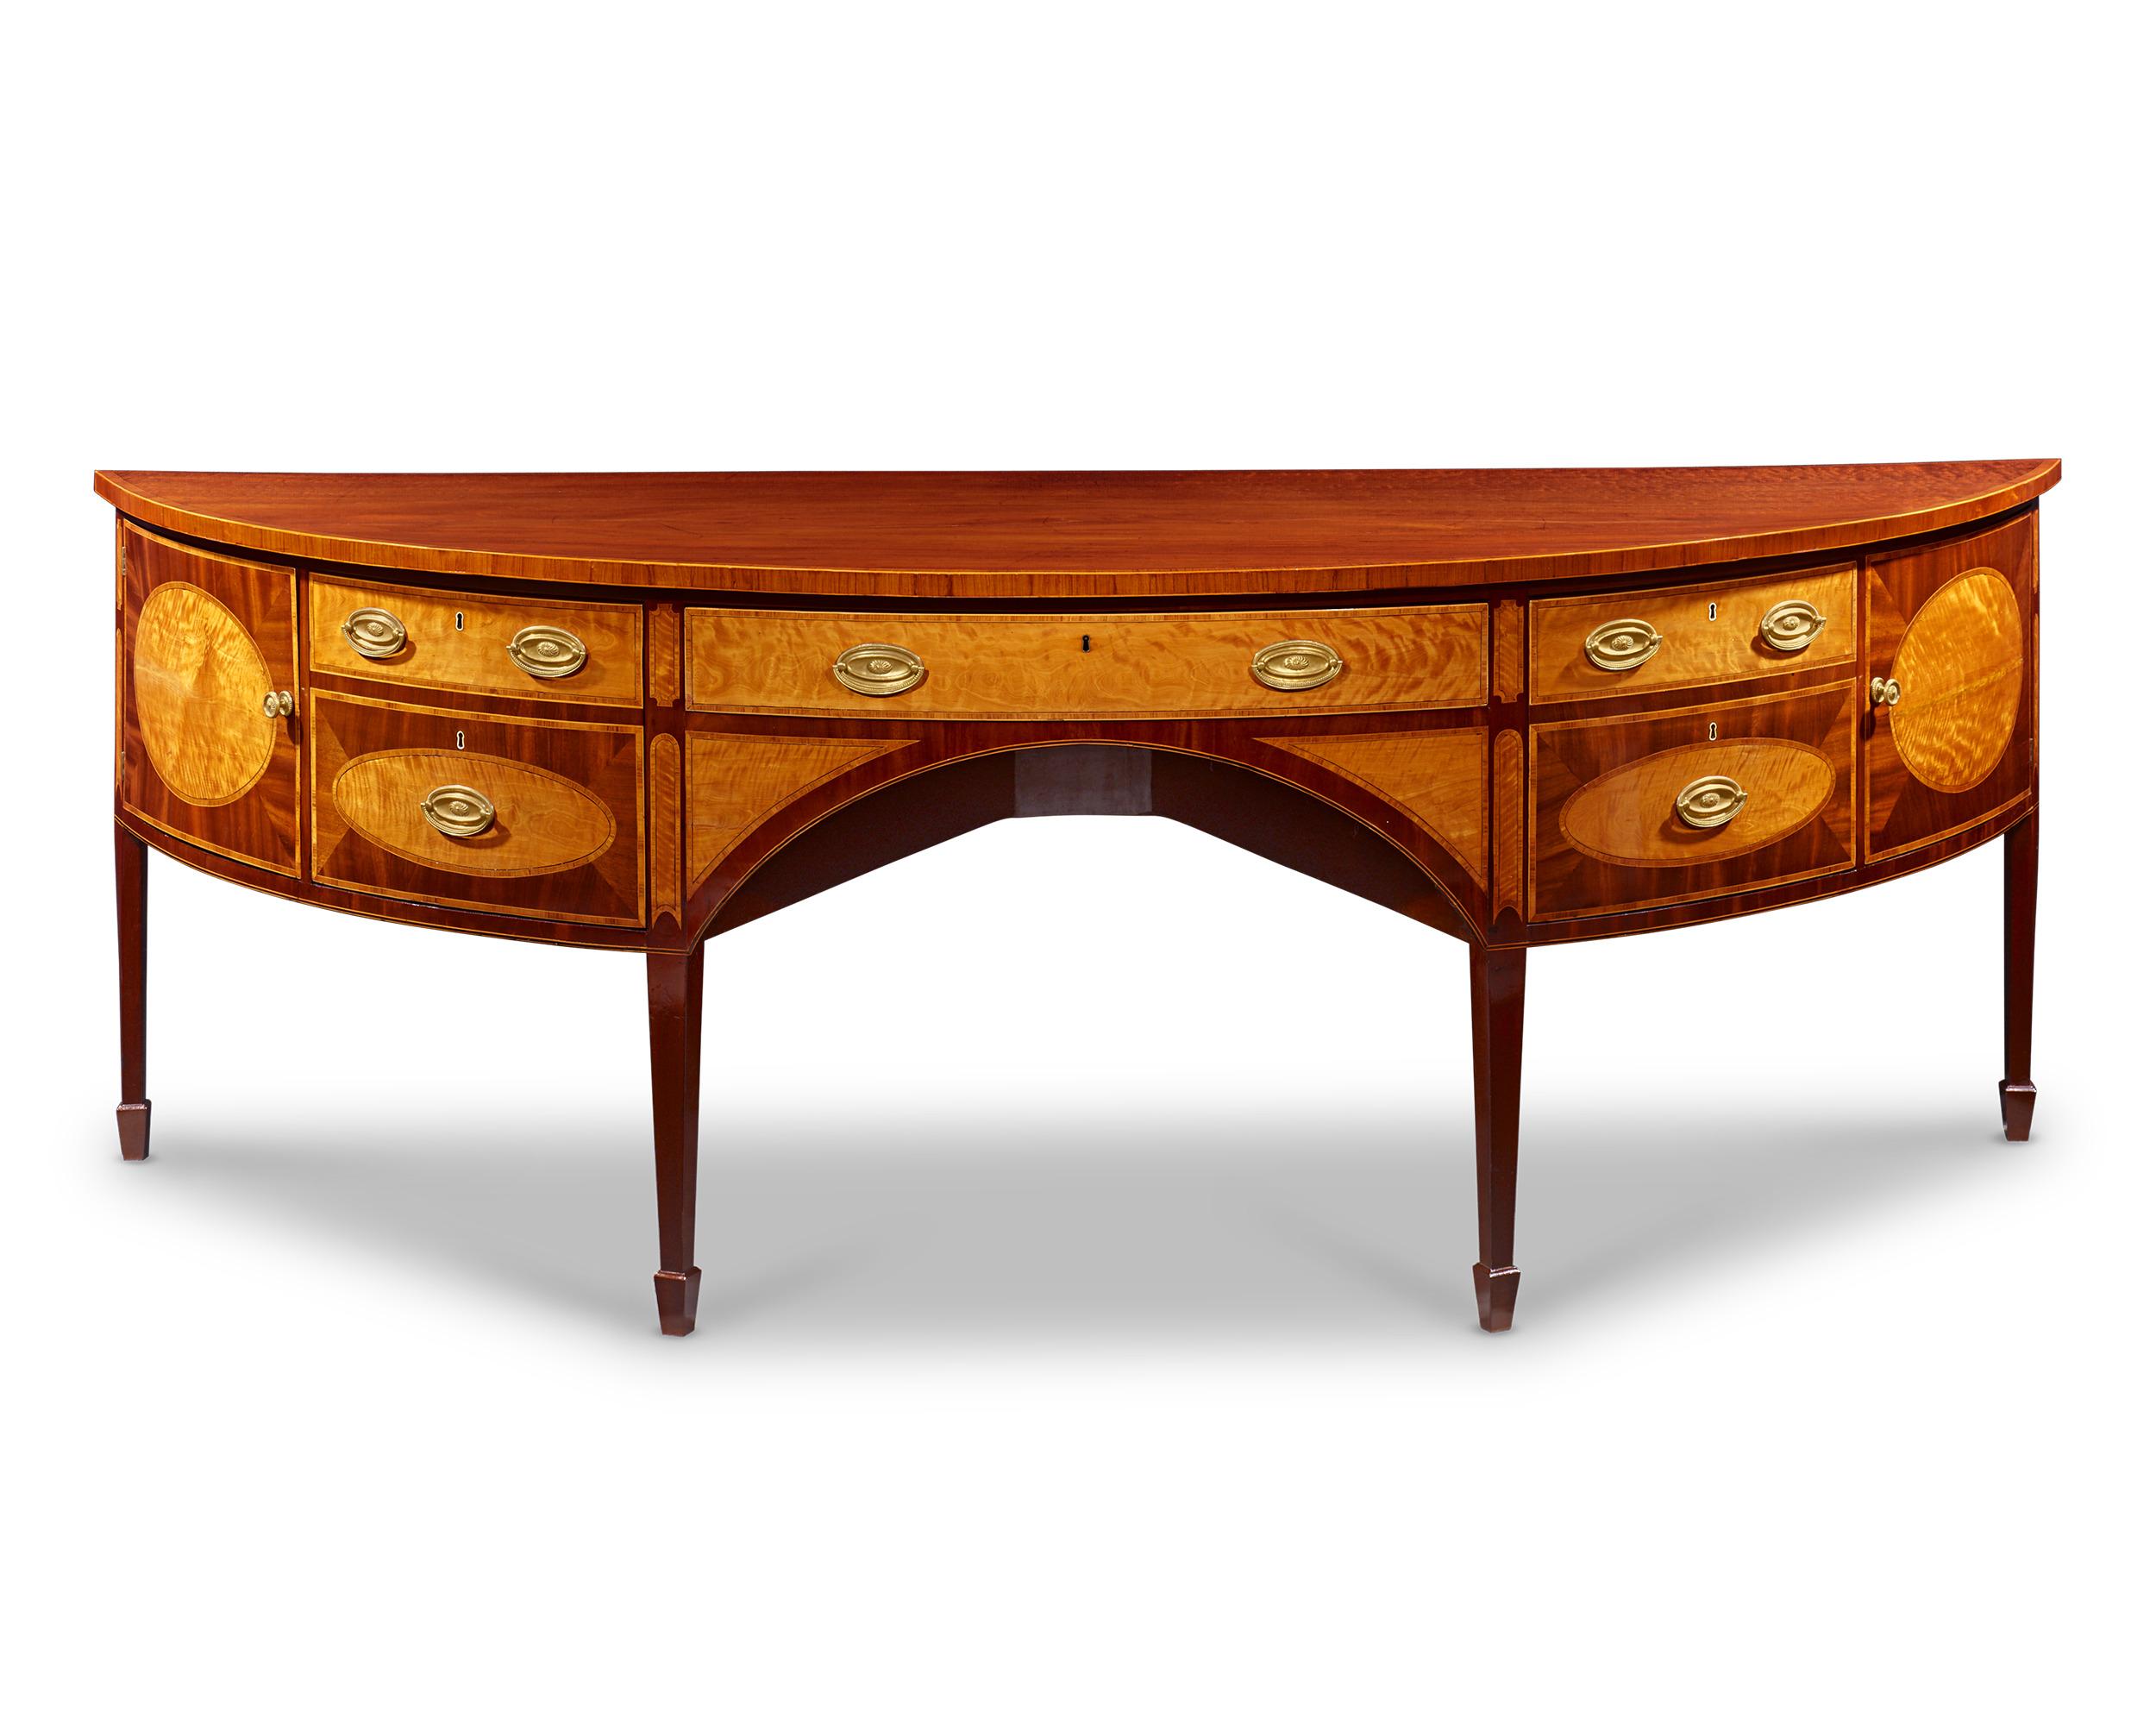 This magnificent demi-lune Georgian sideboard displays the pinnacle of the era’s refined craftsmanship and boasts a distinguished provenance. Crafted of the finest mahogany, the era's timber of choice for well-appointed manor homes, the sideboard is